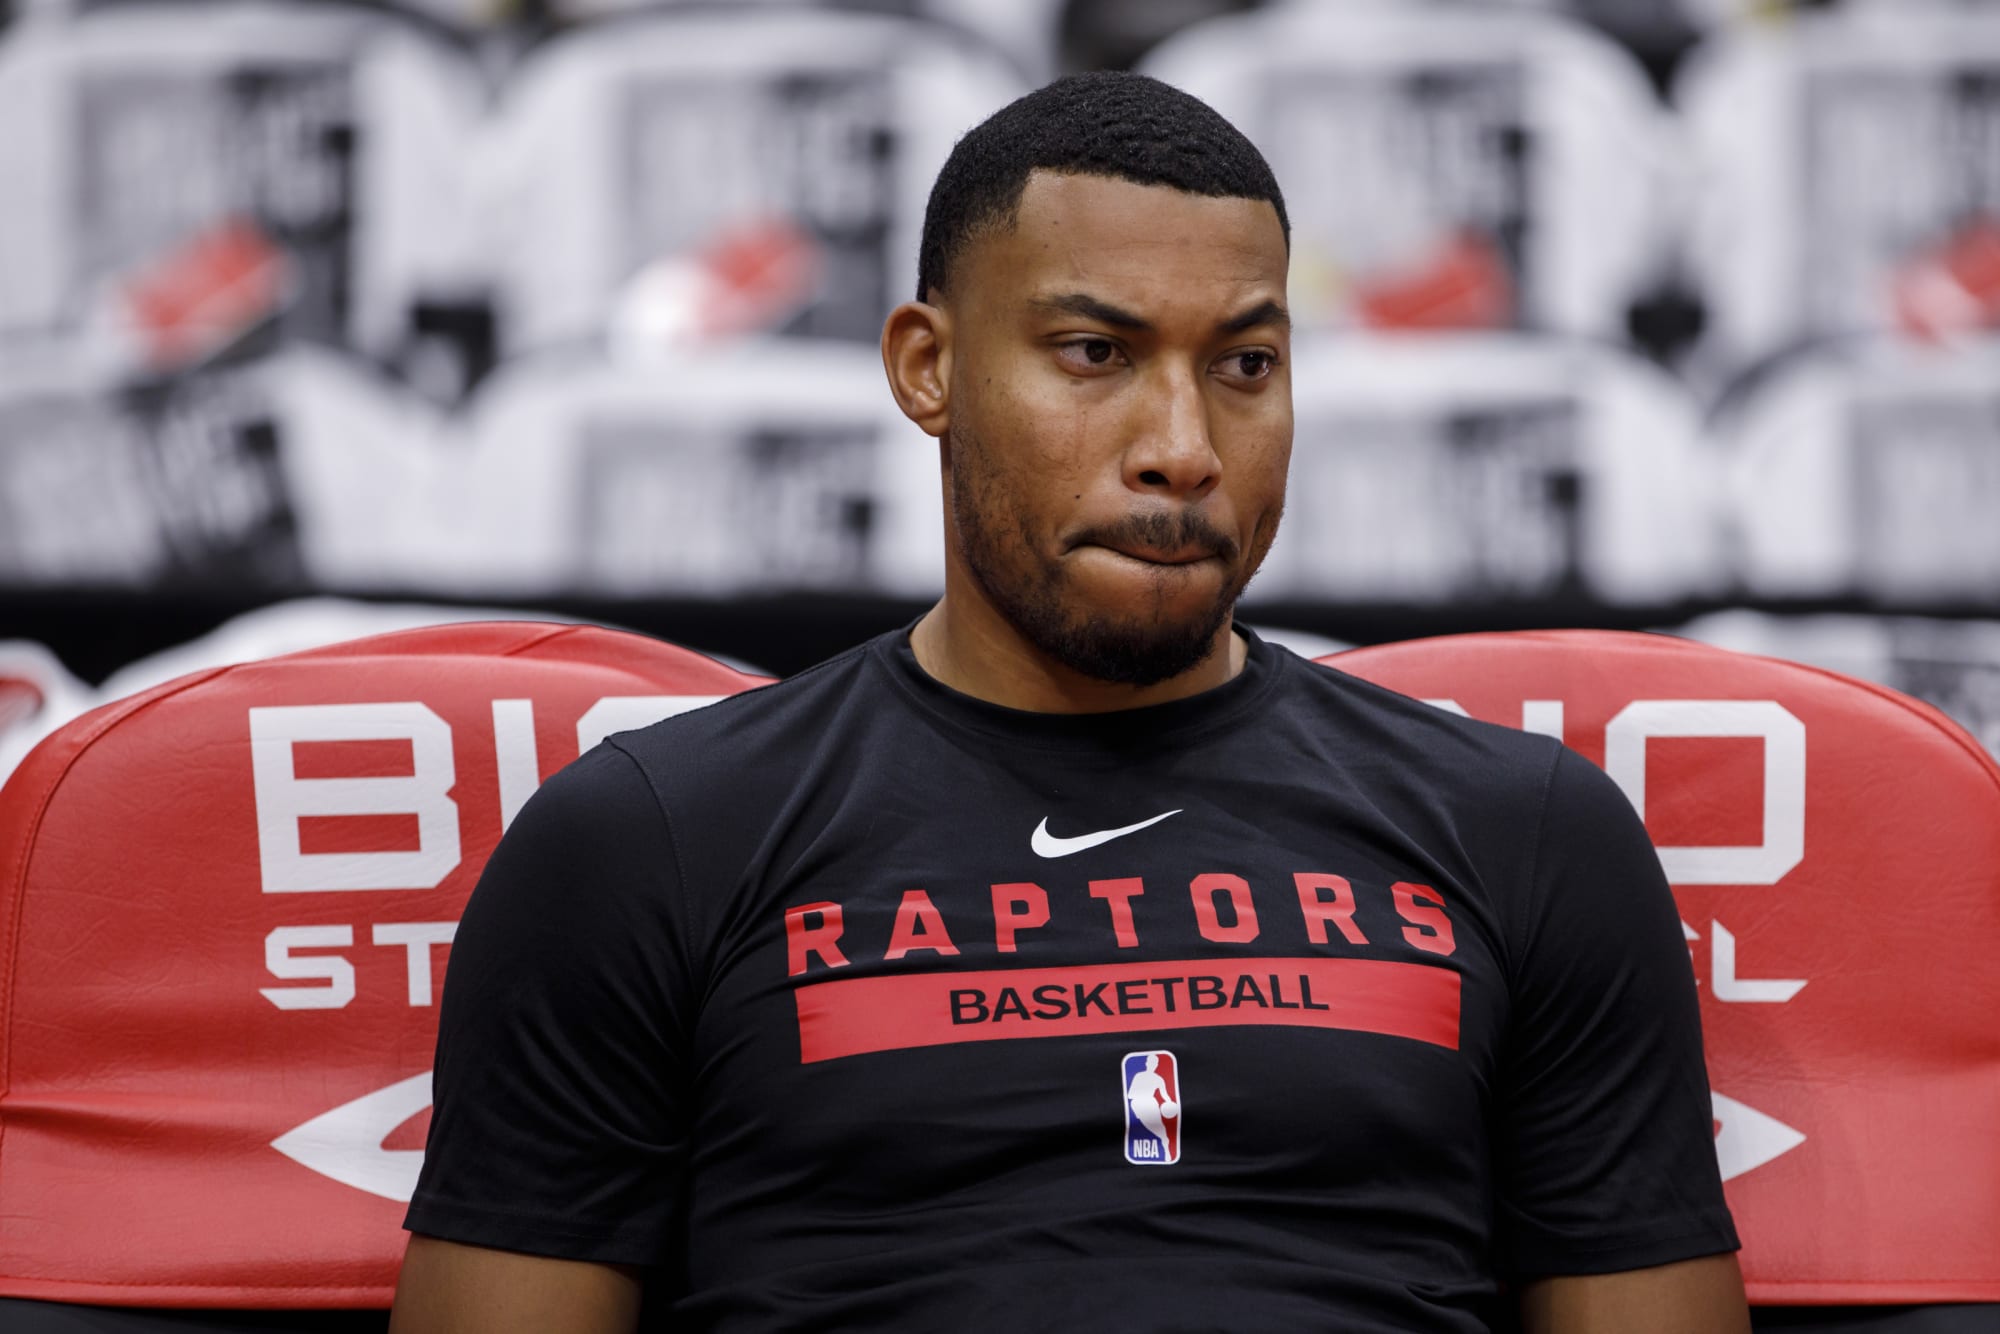 Otto Porter Jr. needs to be more aggressive to lead Raptors bench